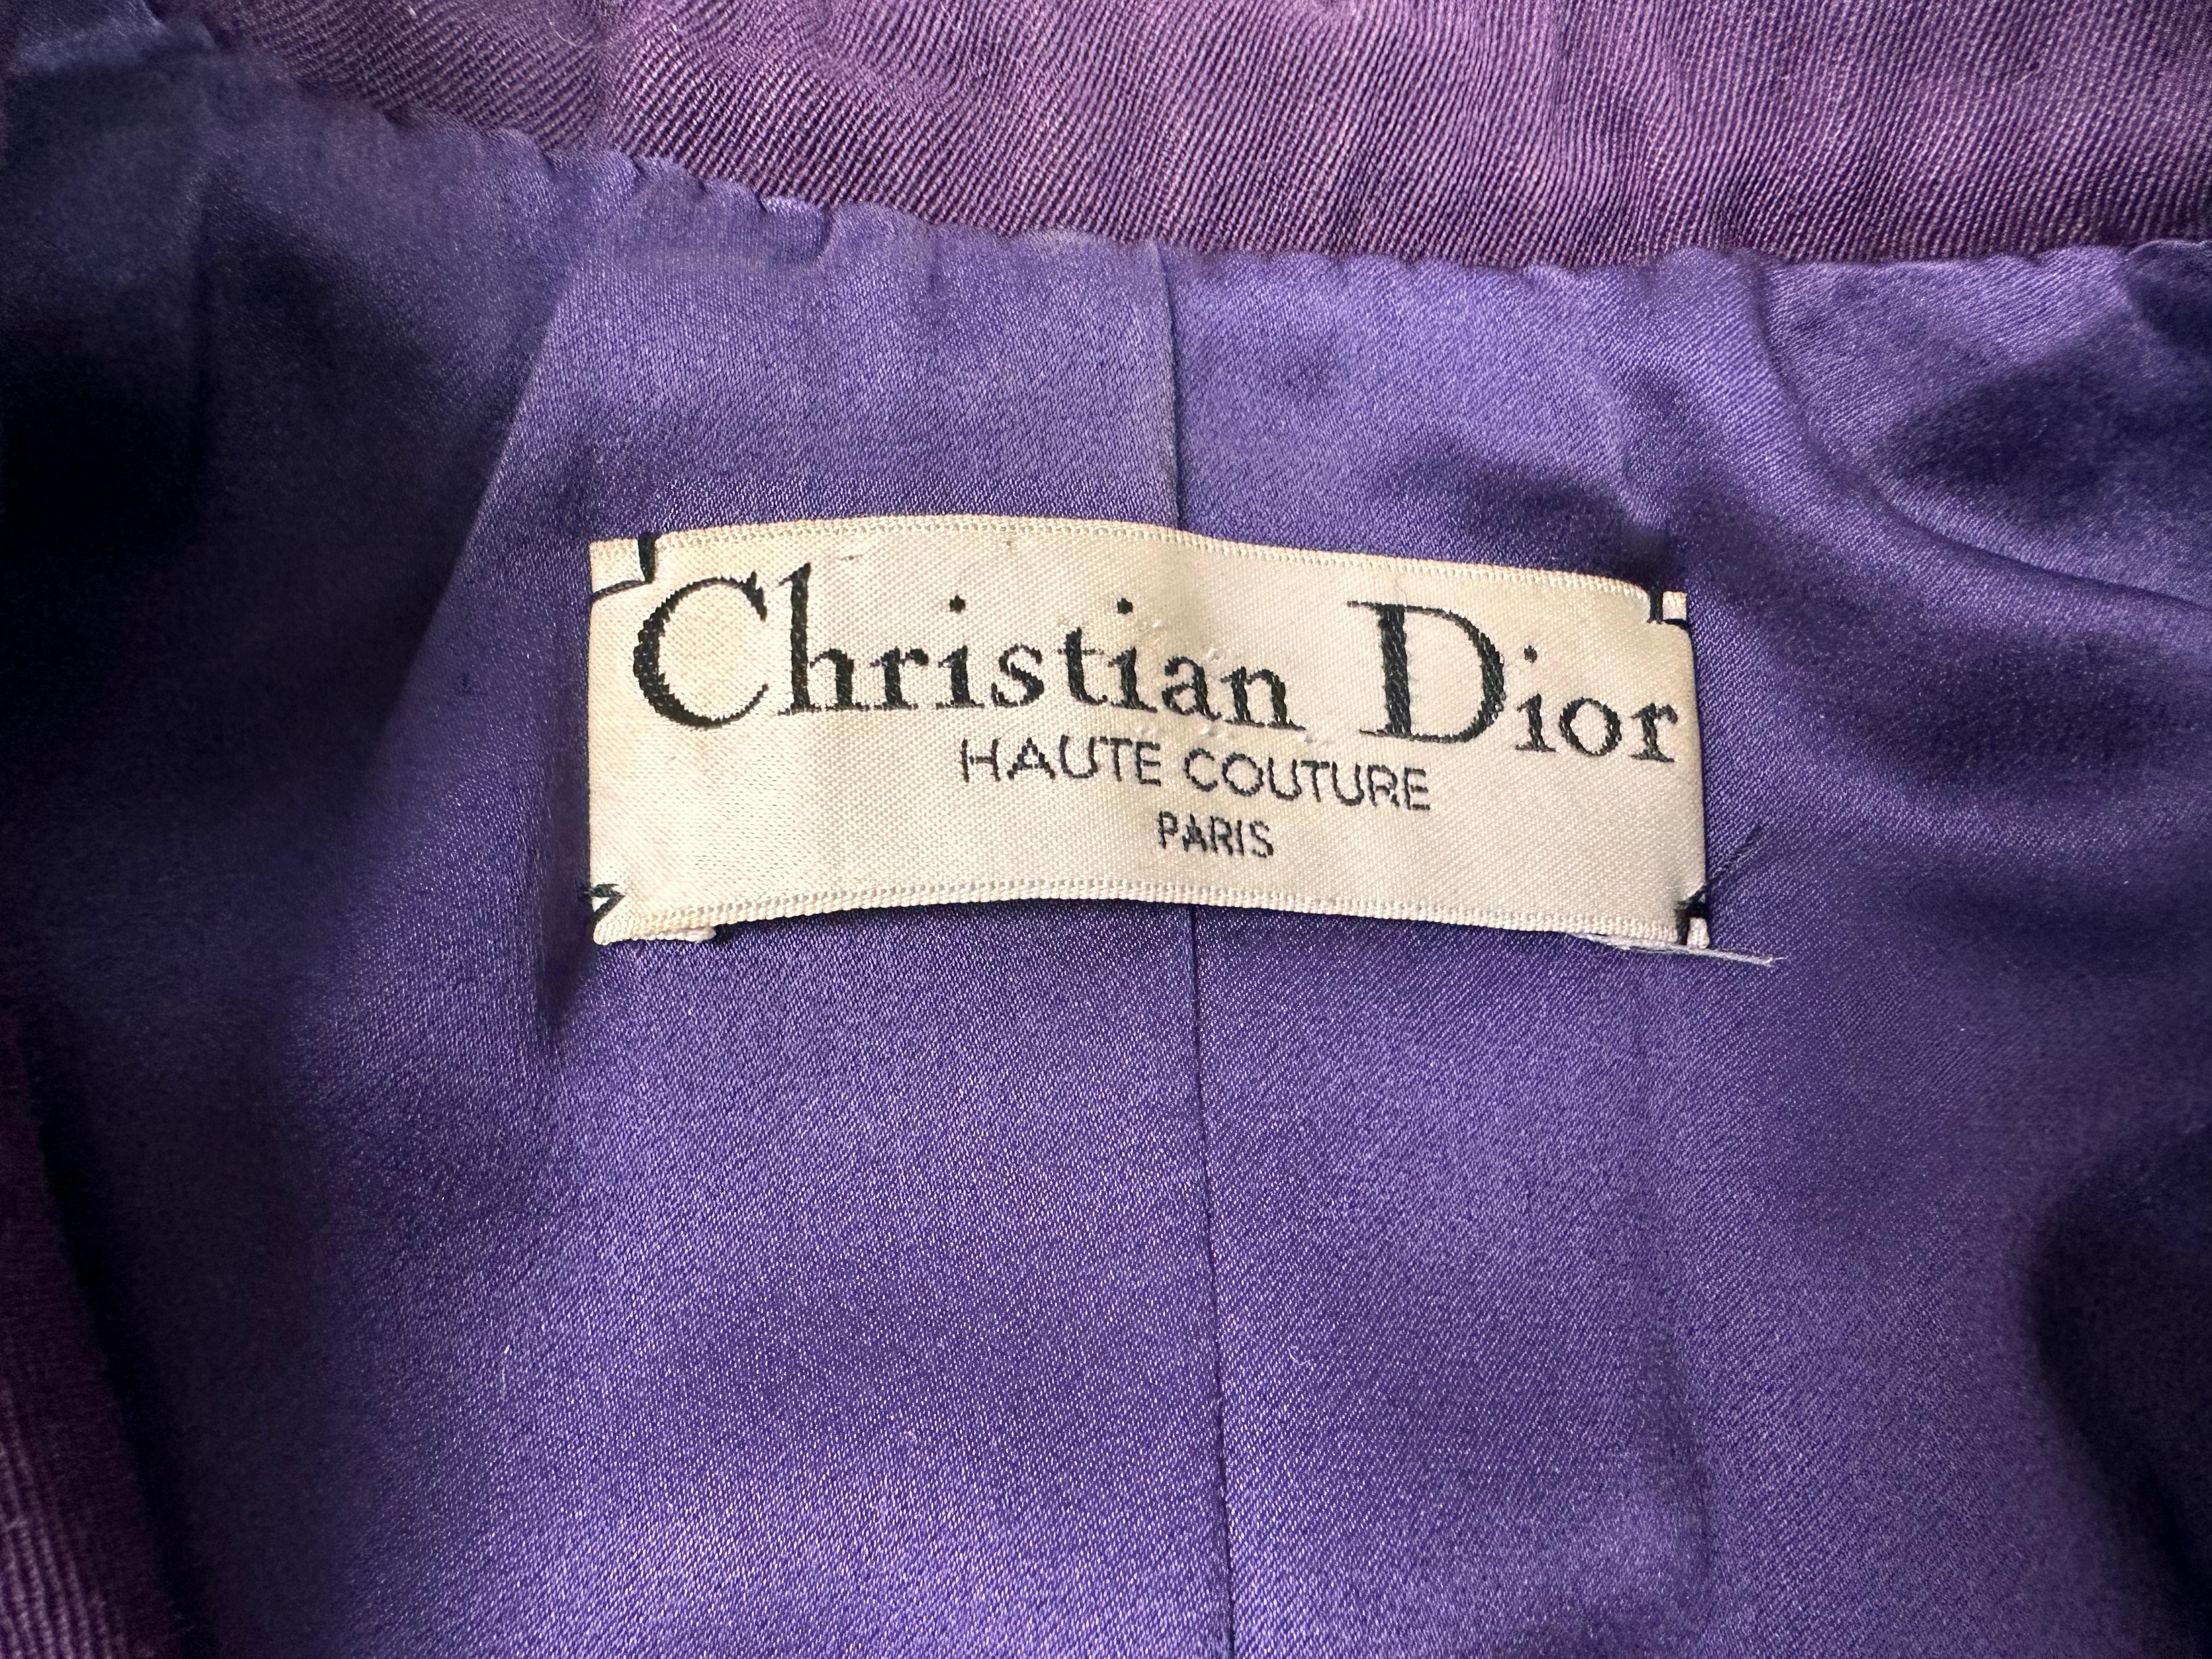 Skirt suit by Gianfranco Ferré for Christian Dior Haute Couture Circa 1995 In Good Condition For Sale In Toulon, FR